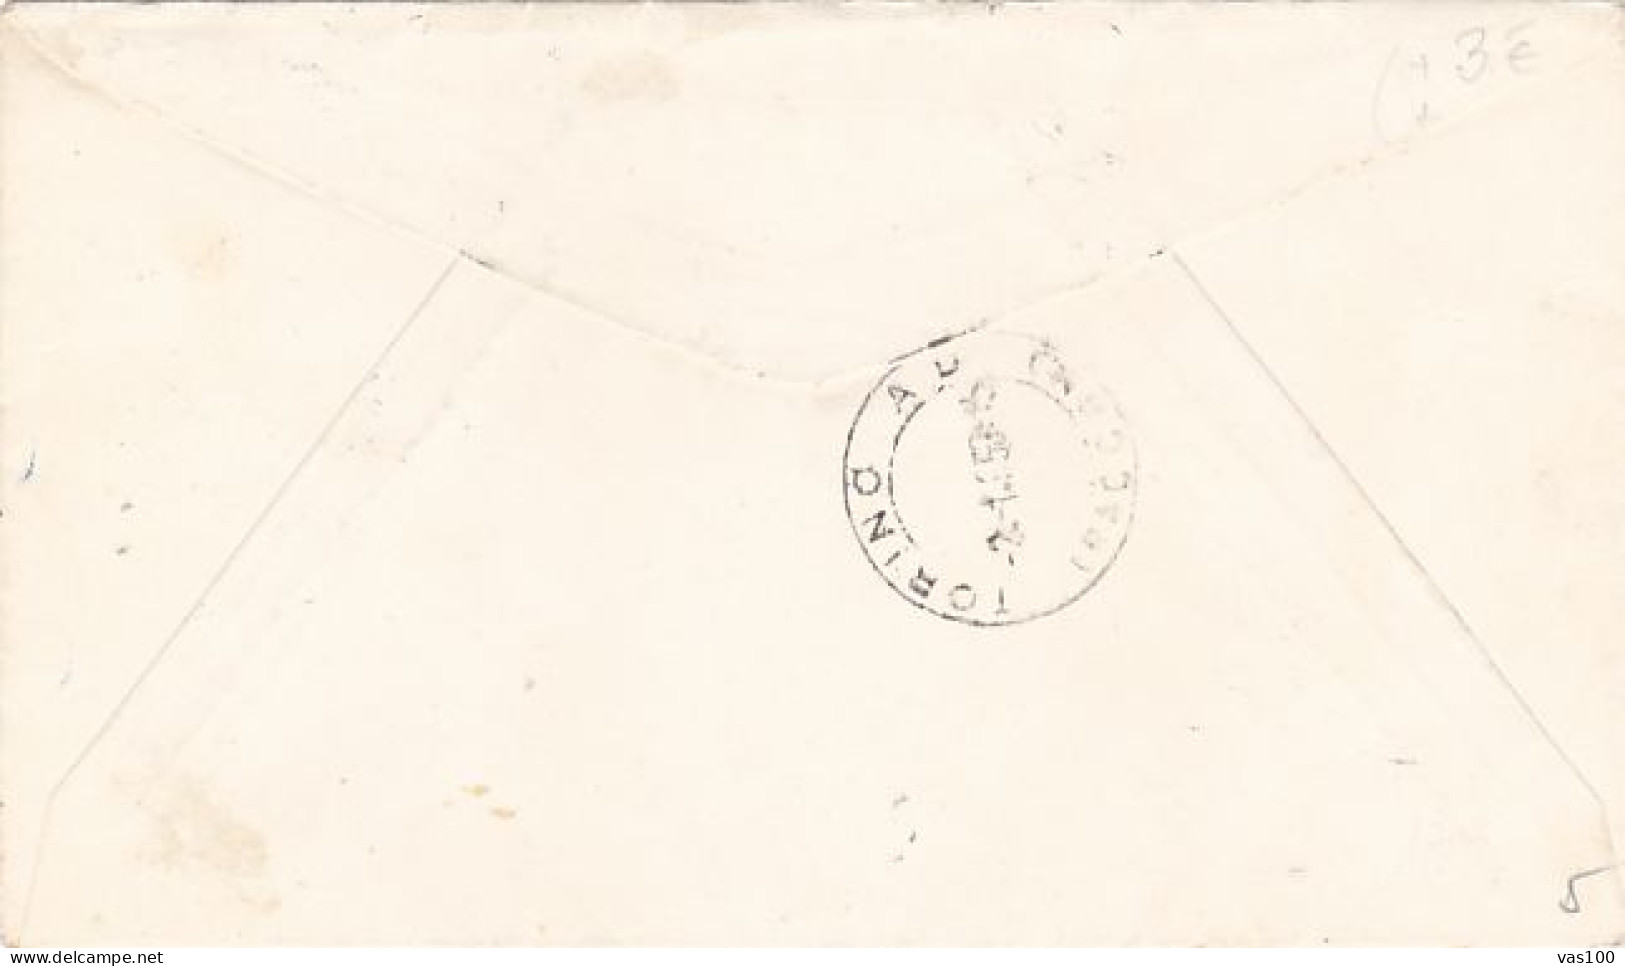 PHILATELY, STAMP'S DAY, SICILIAN STAMPS CENTENARY, REGISTERED COVER FDC, 1959, ITALY - Journée Du Timbre